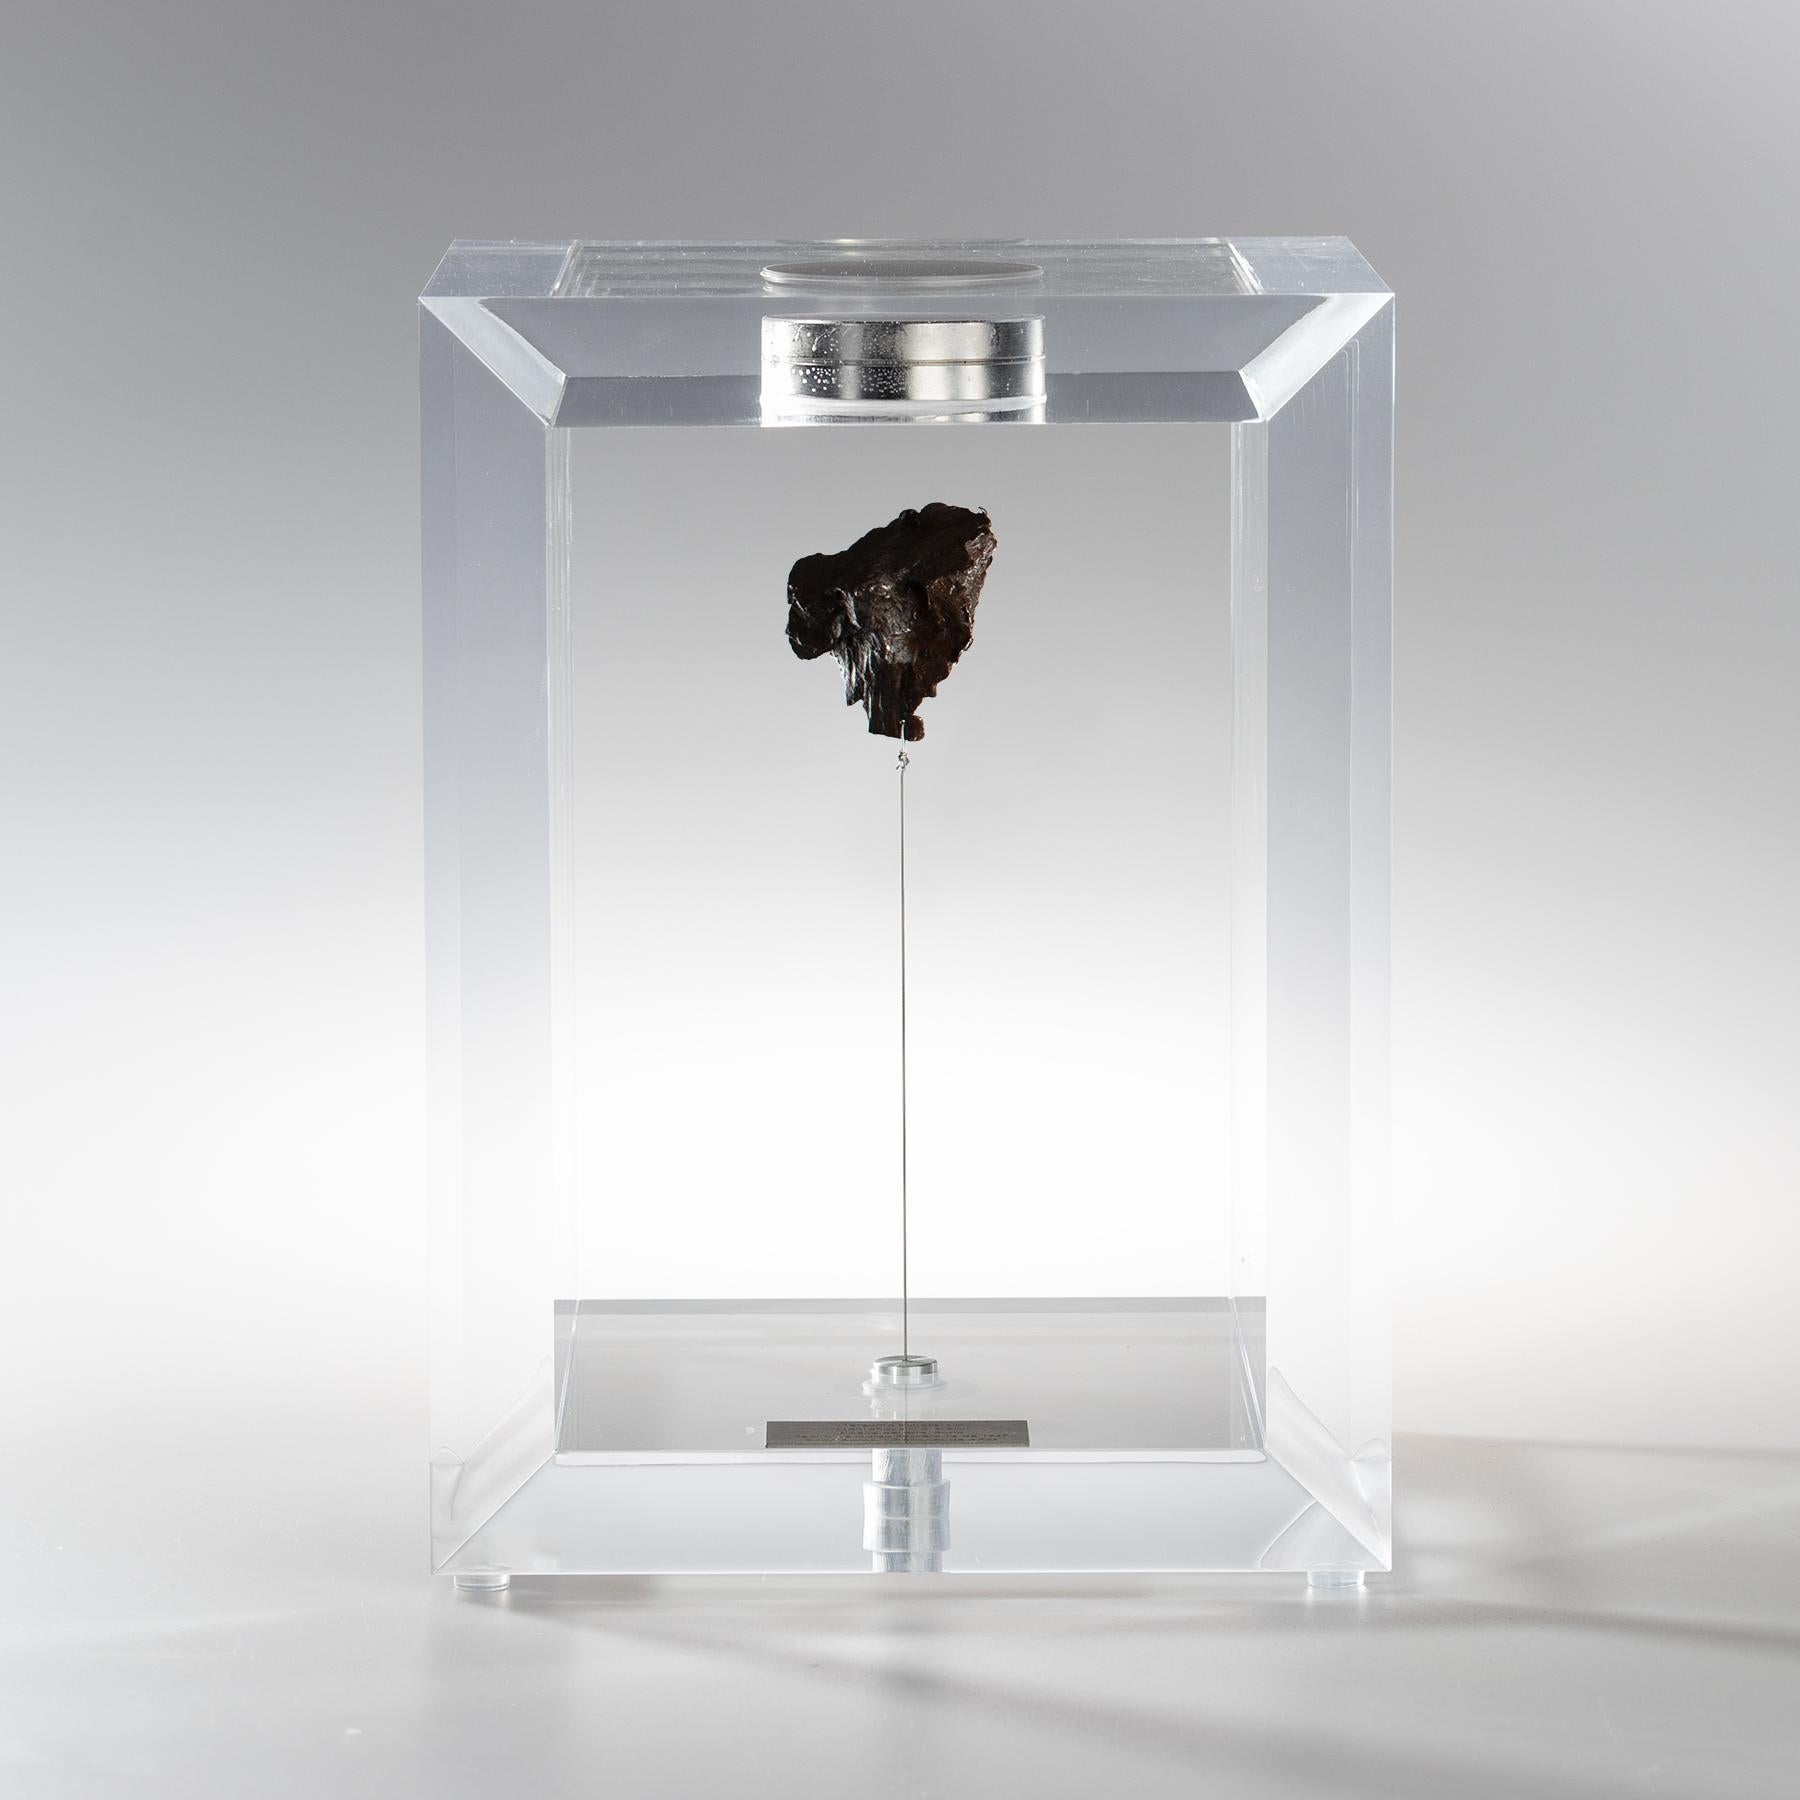 The “Space Box” was designed by Ernesto Duran, as a creative way to enhance the uniqueness of meteorites and could also be use as a decorative piece. Its an acrylic box with a magnet on top and a steel string pulling the Meteorite straight